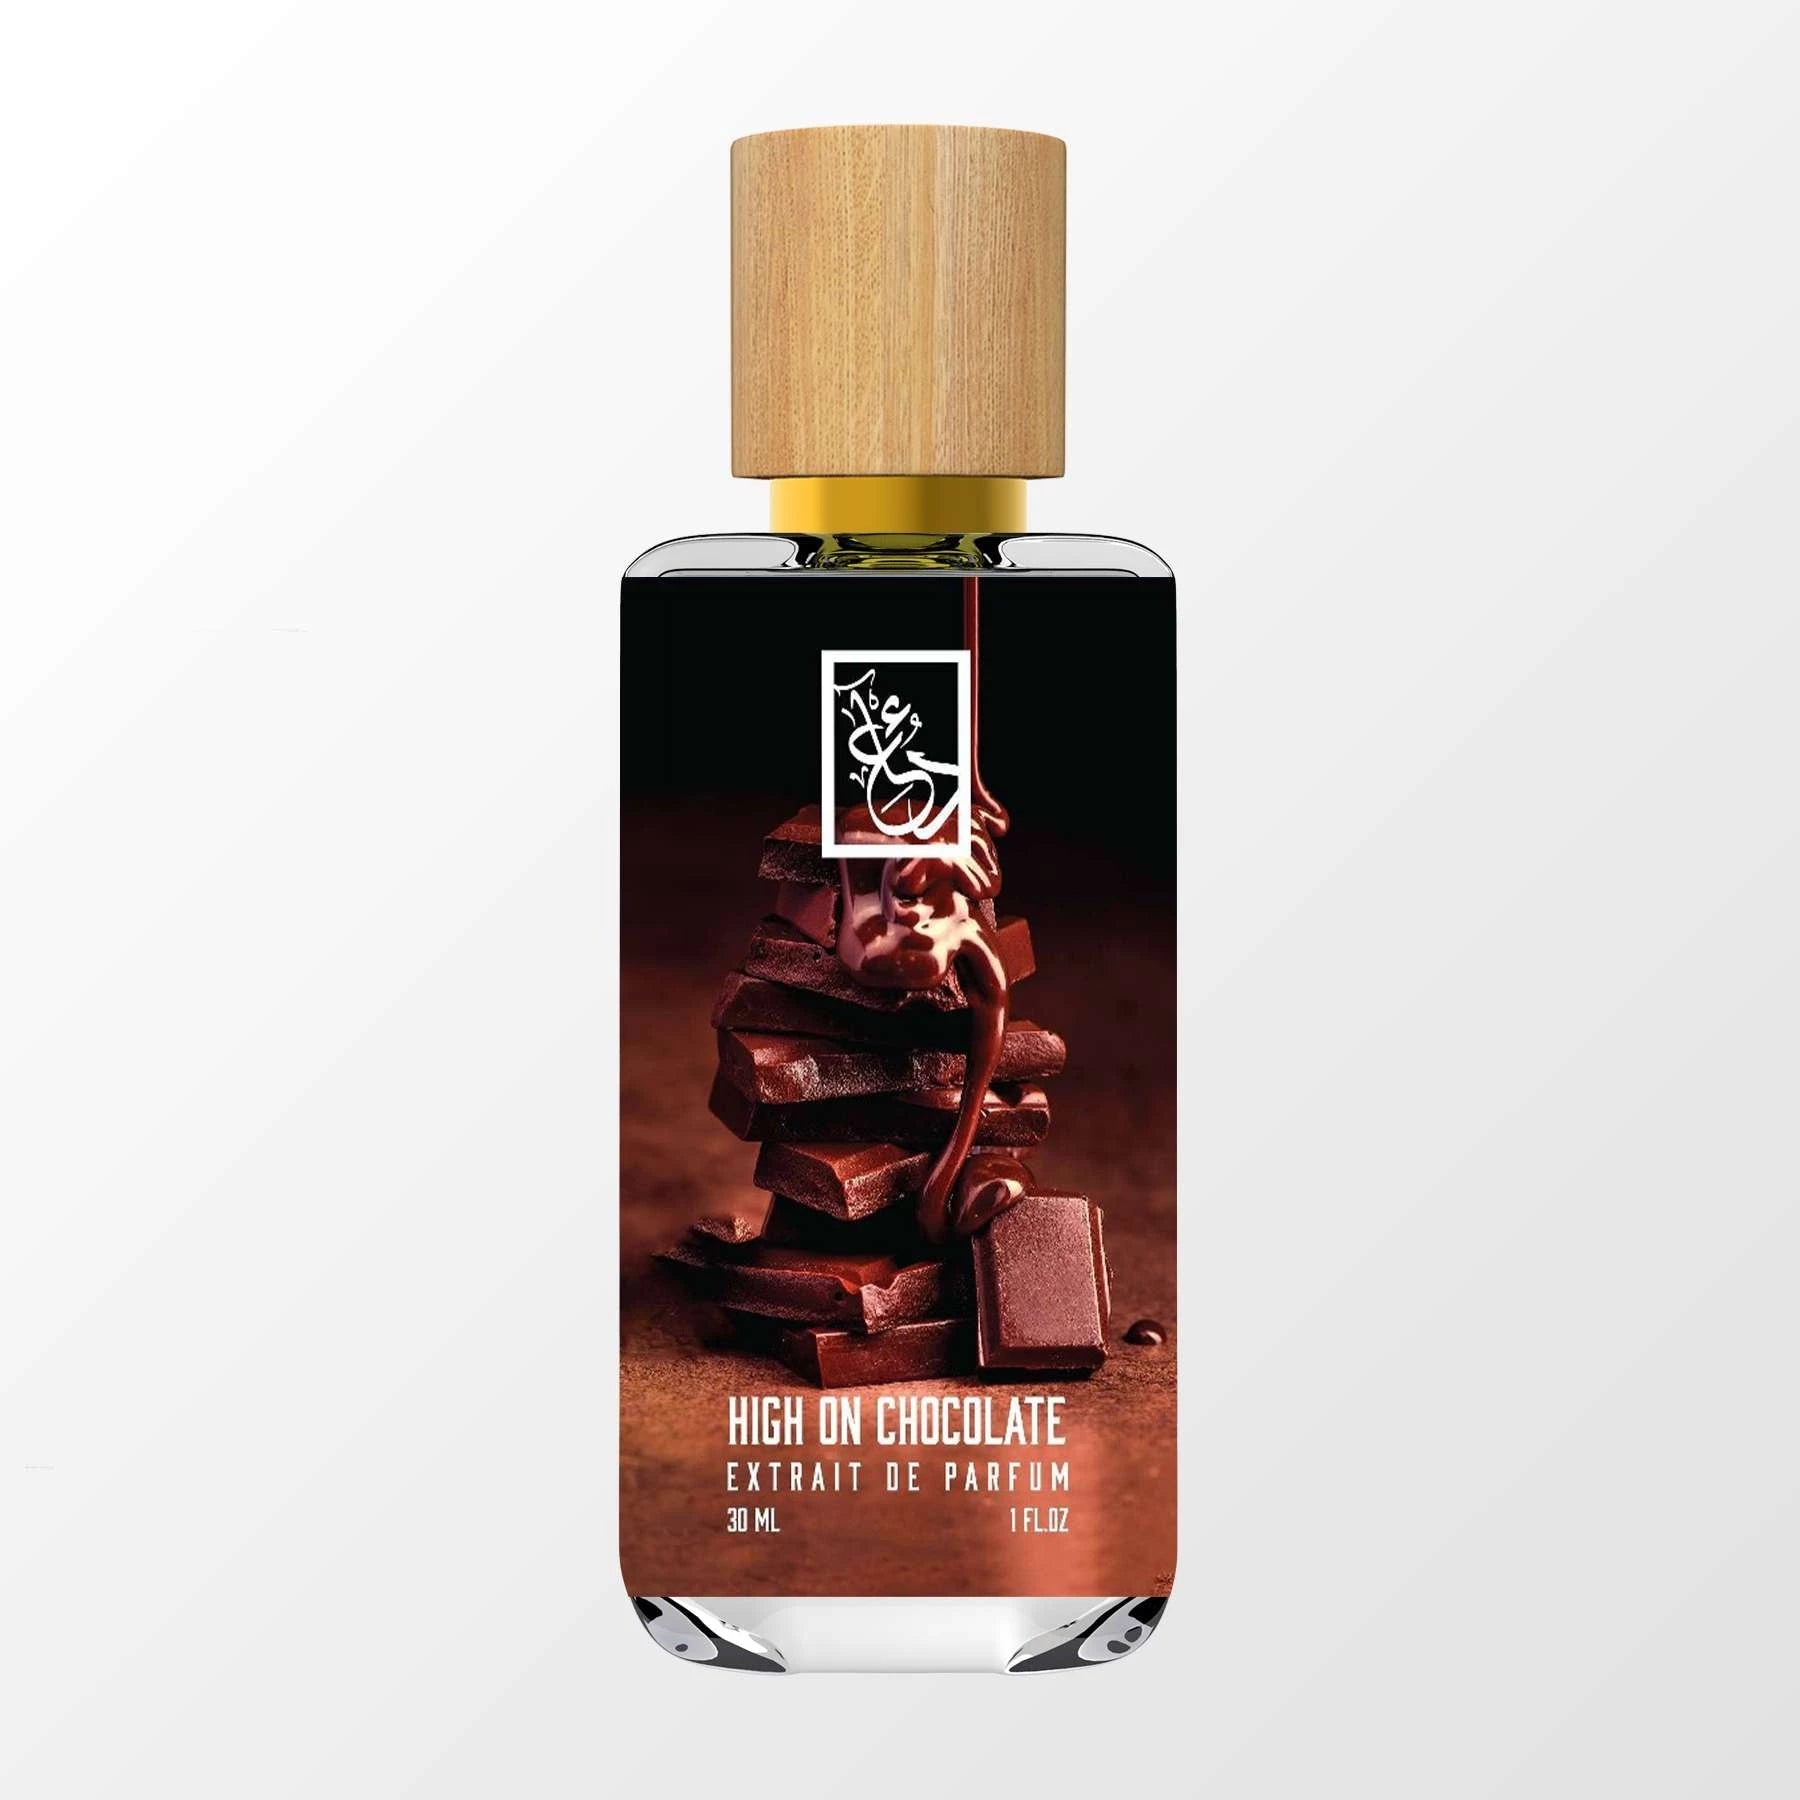 Joyful Oud Inspired by Initio Parfums Oud for Happiness 3 ml